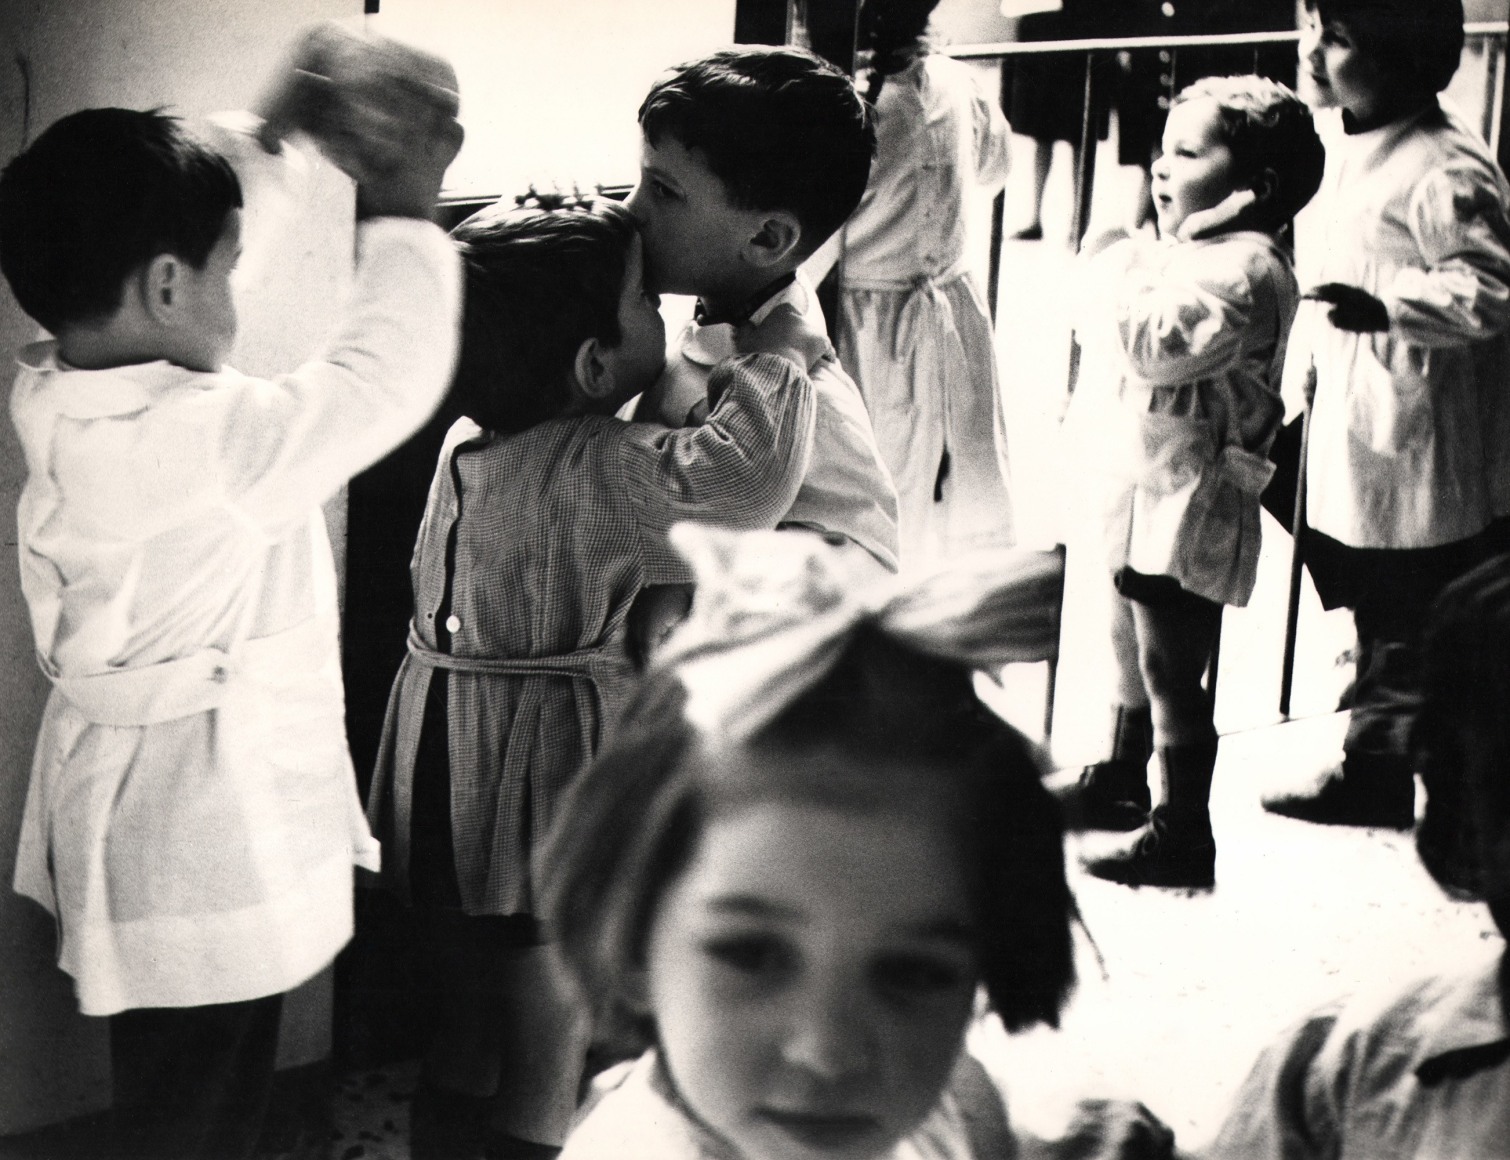 12. Renzo Tortelli, Piccolo Mondo, 1958&ndash;1959. High contrast image. A crowd of children in white gathered in a room. Central boy appears to kiss a smaller boy on the forehead.